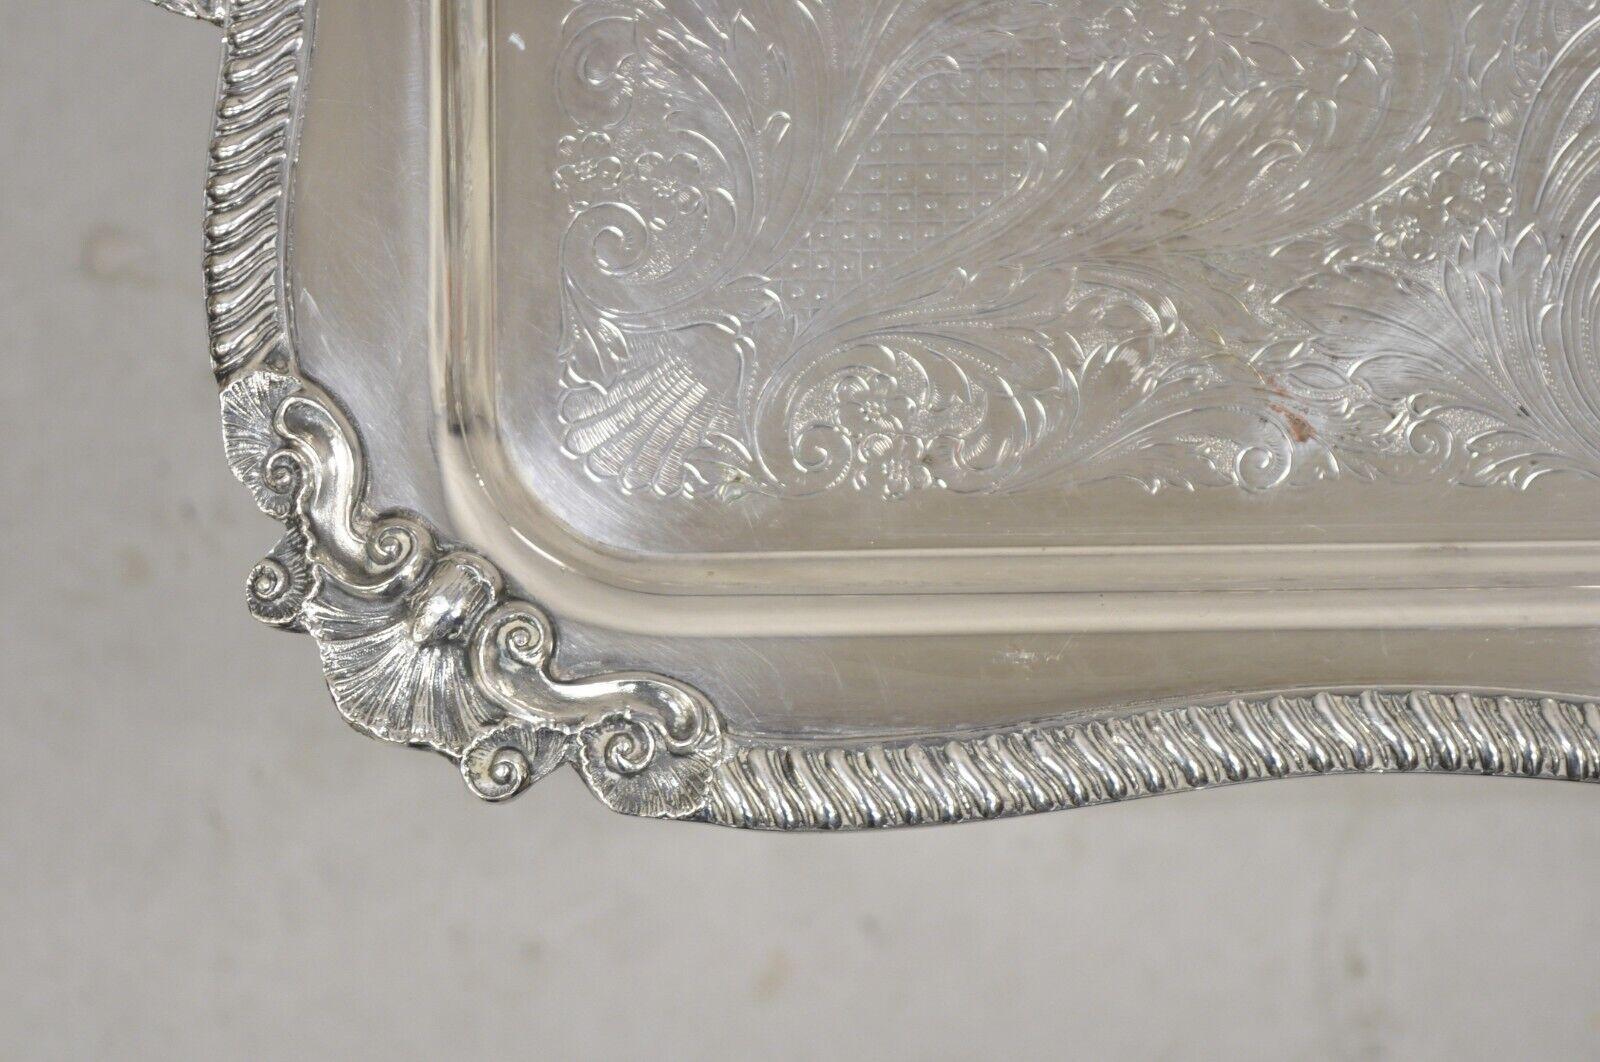 Sheridan Large Ornate Silver Plated English Victorian Style Serving Platter Tray 4